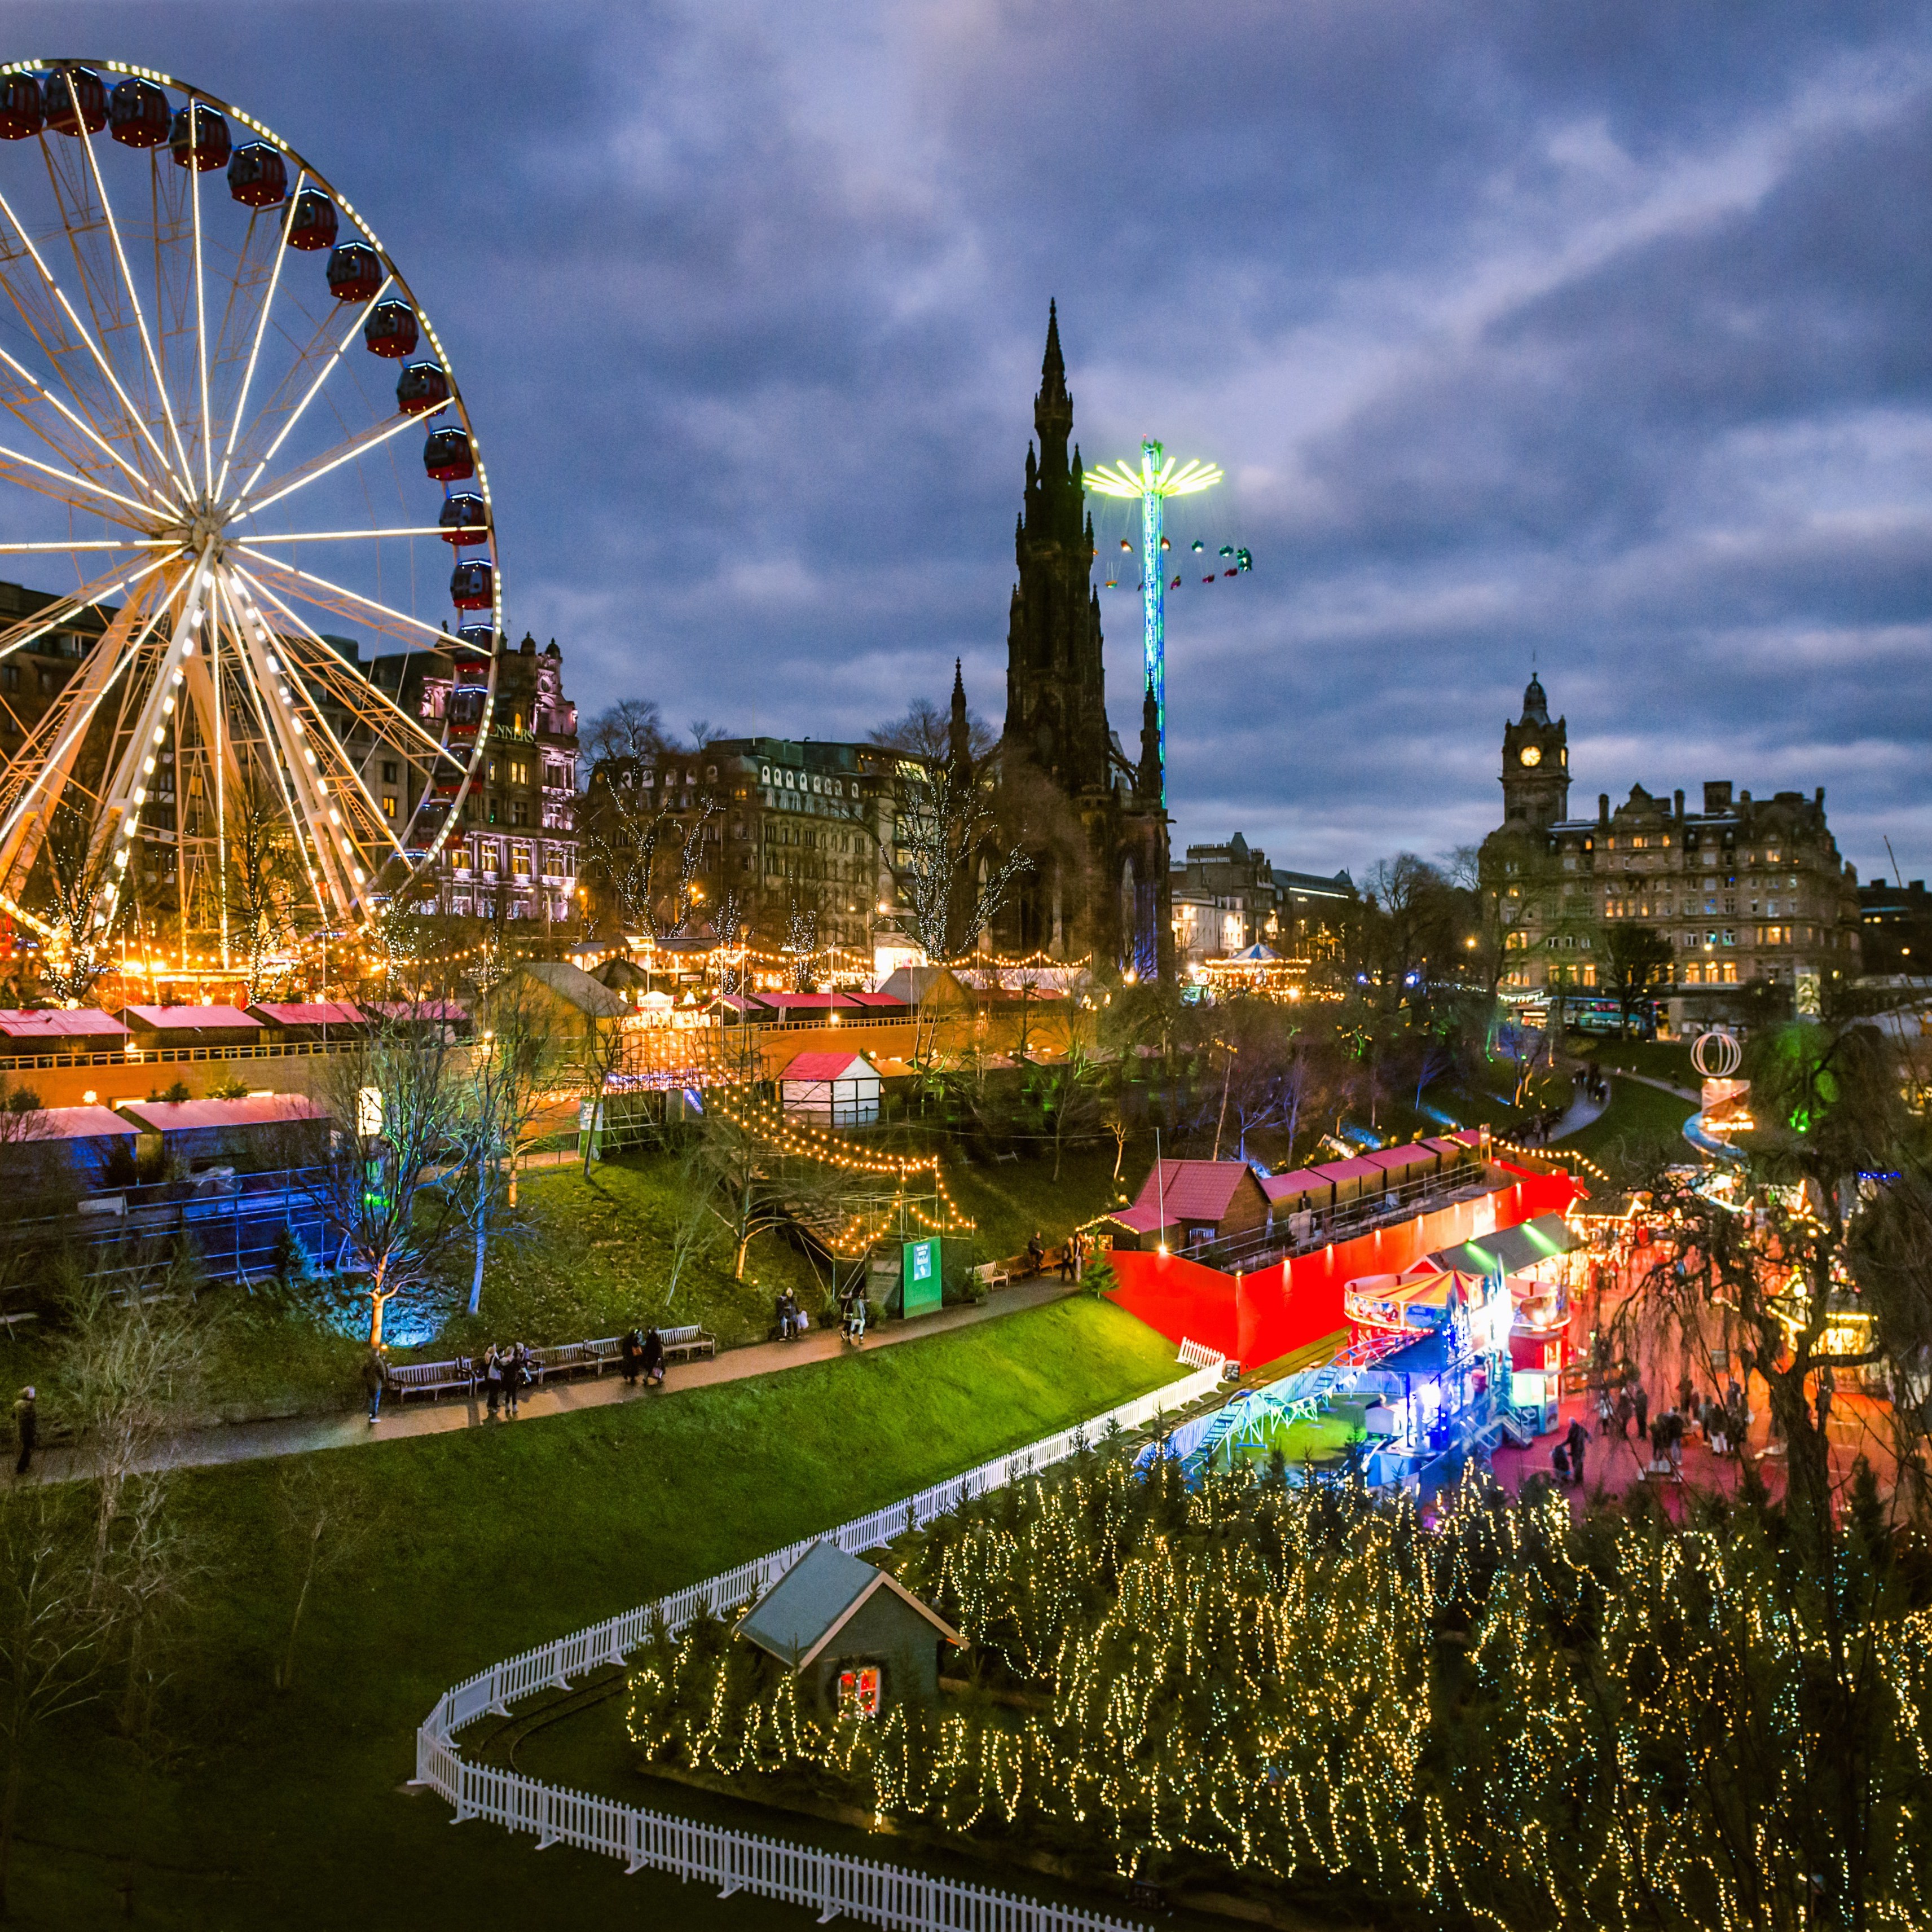 Christmas attractions and rides in Edinburgh’s Princes Street Gardens